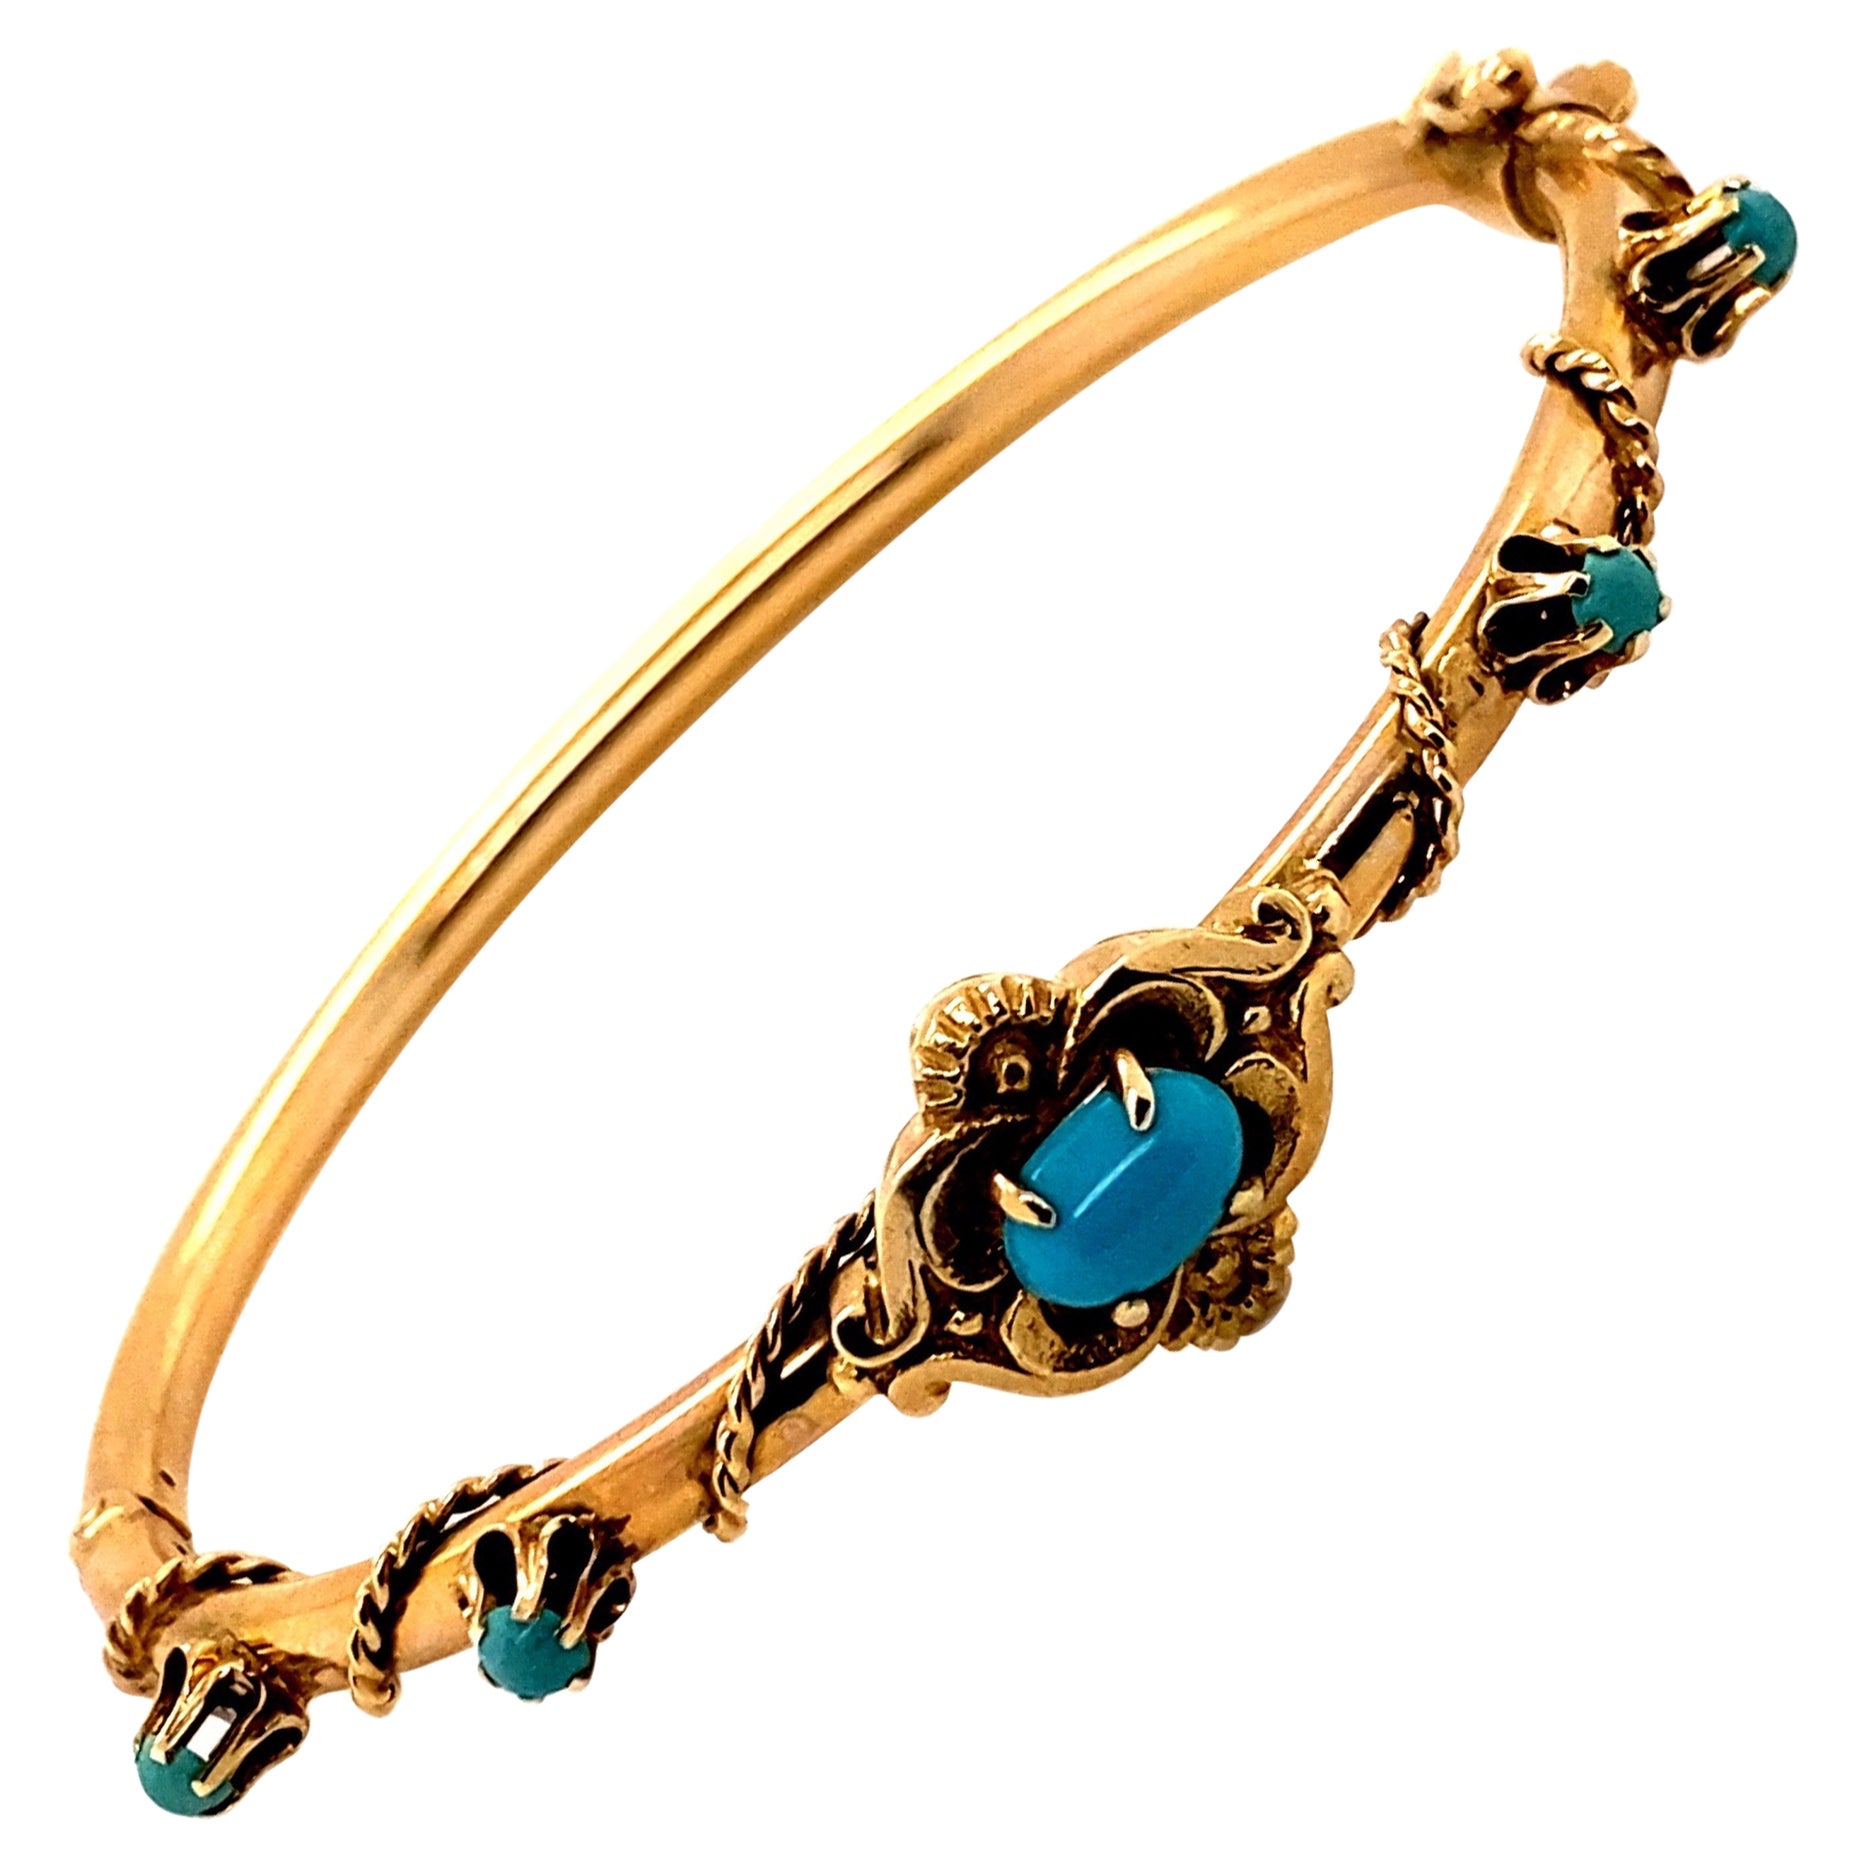 14K Yellow Gold Victorian Reproduction Bangle Bracelet with Turquoise For Sale